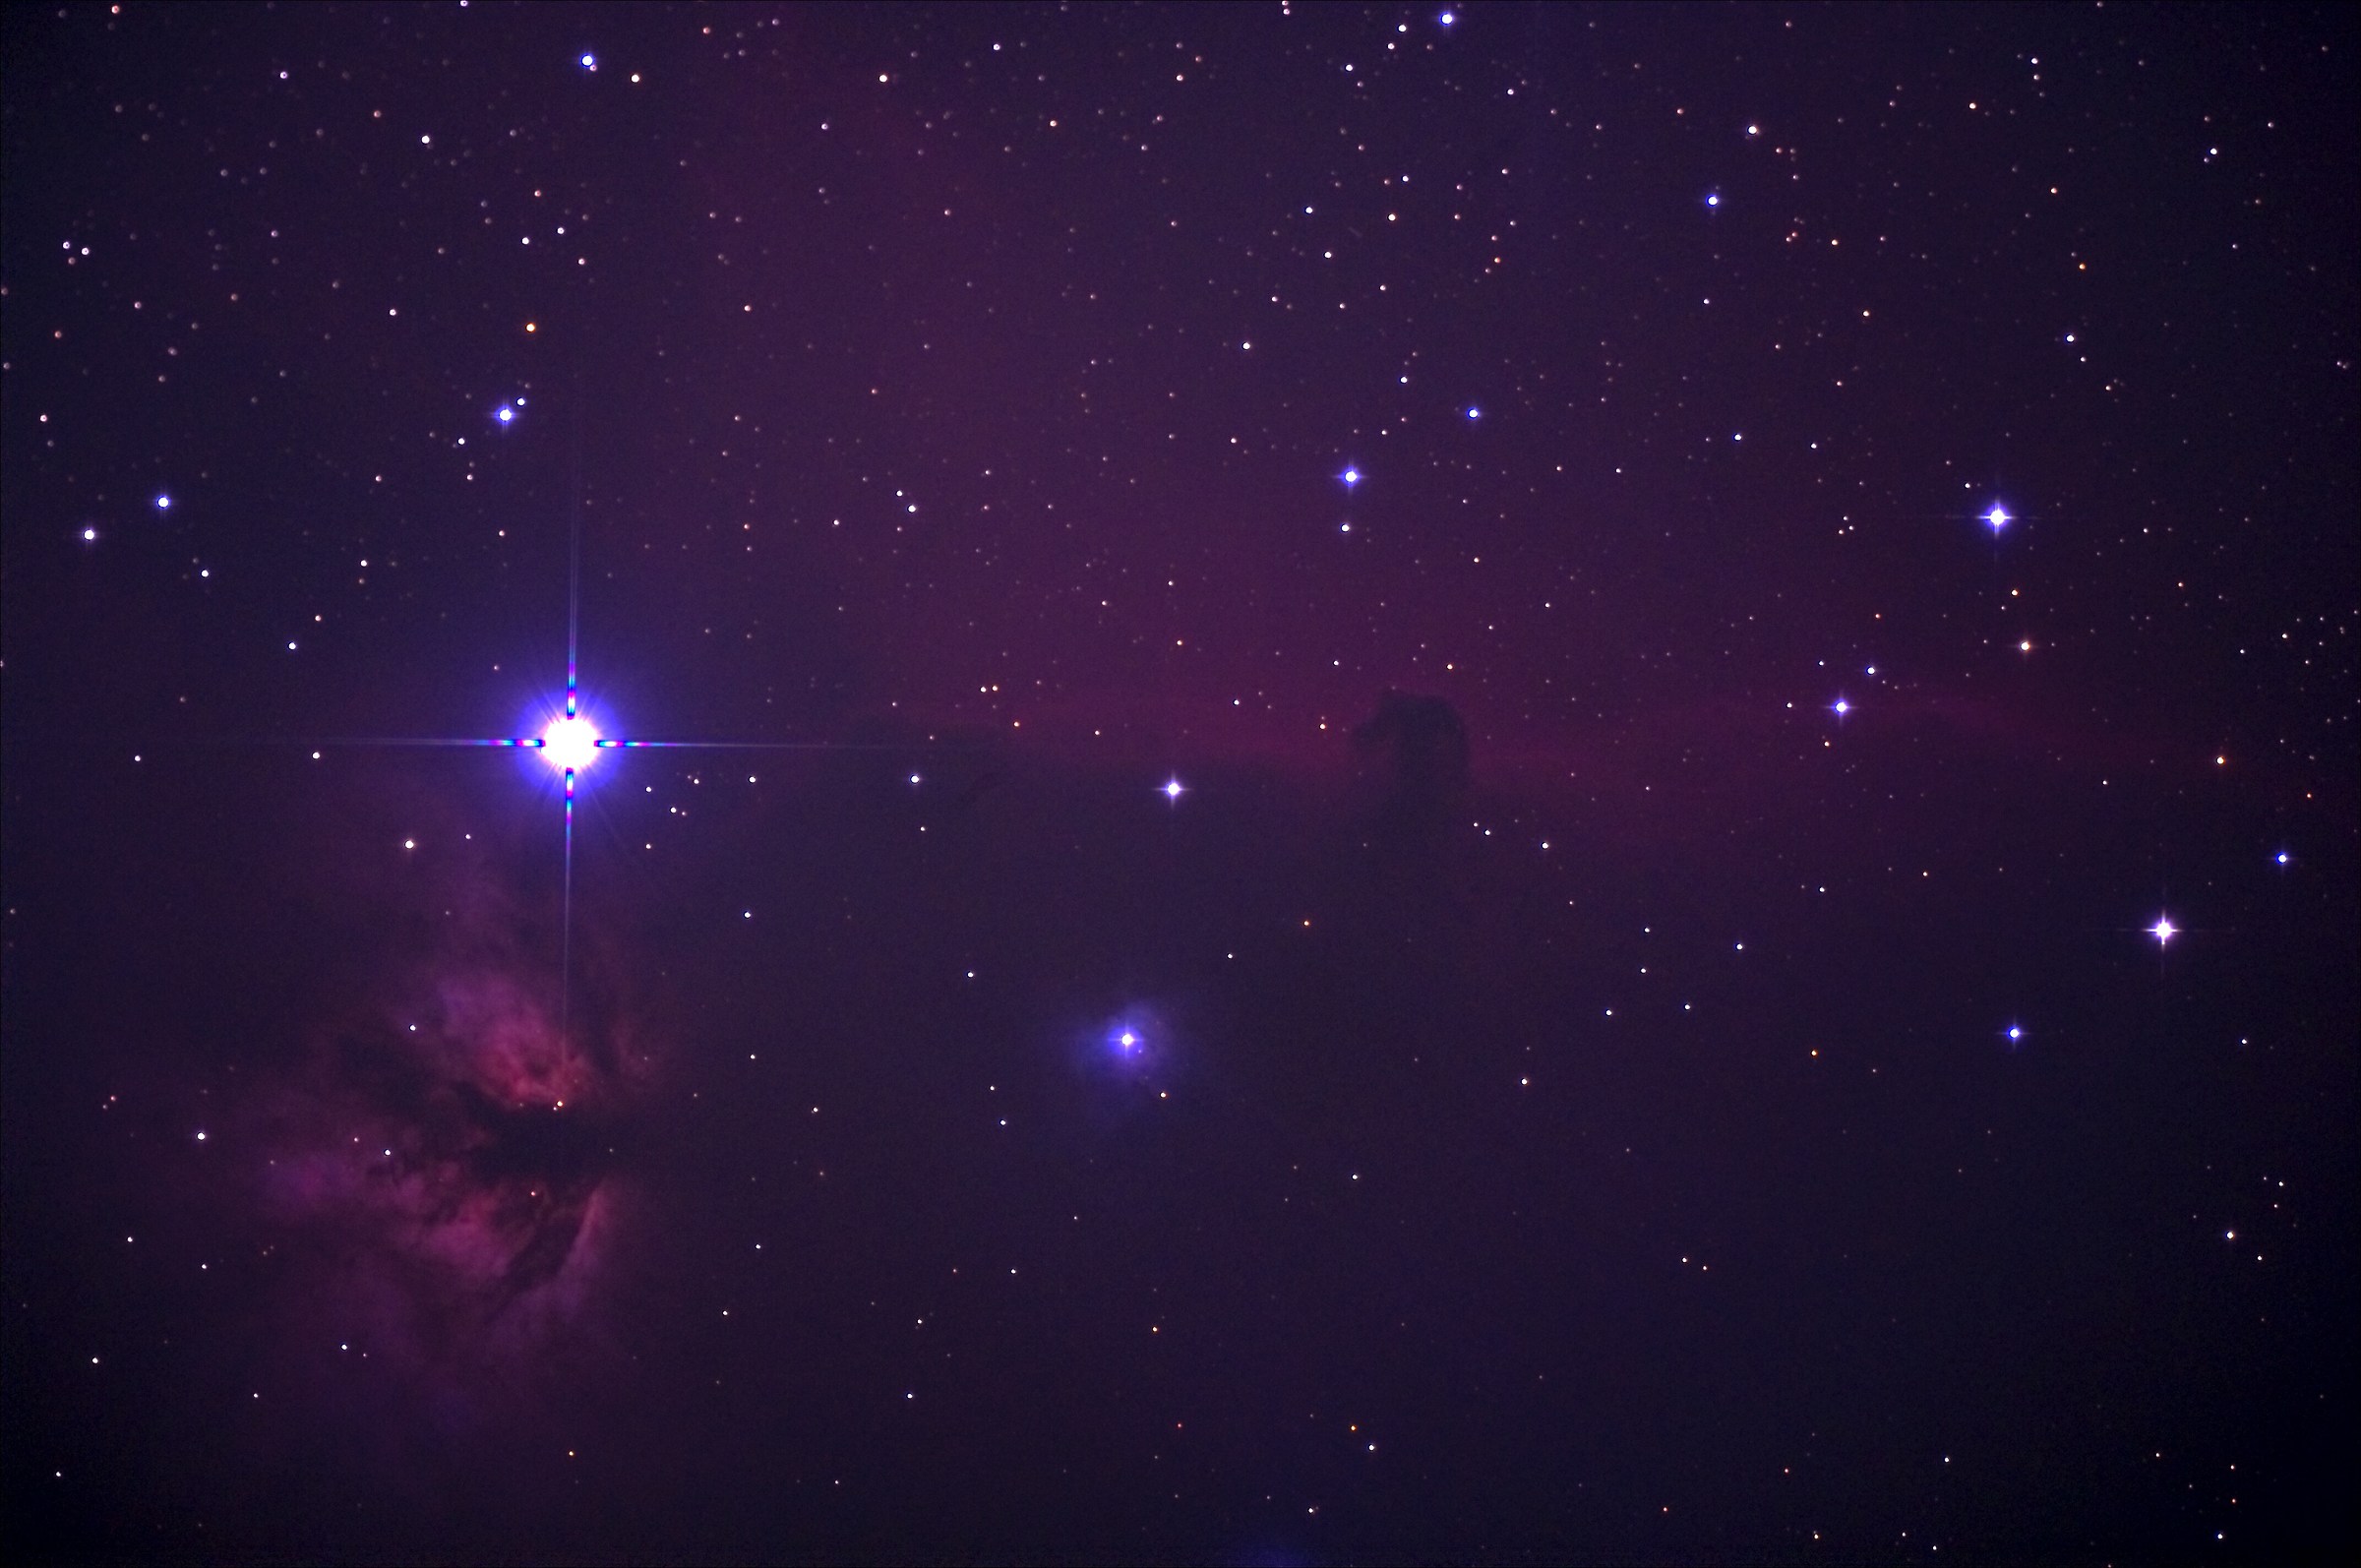 IC434 22 photos tot. 33 'intes mk69 f6 unguided...